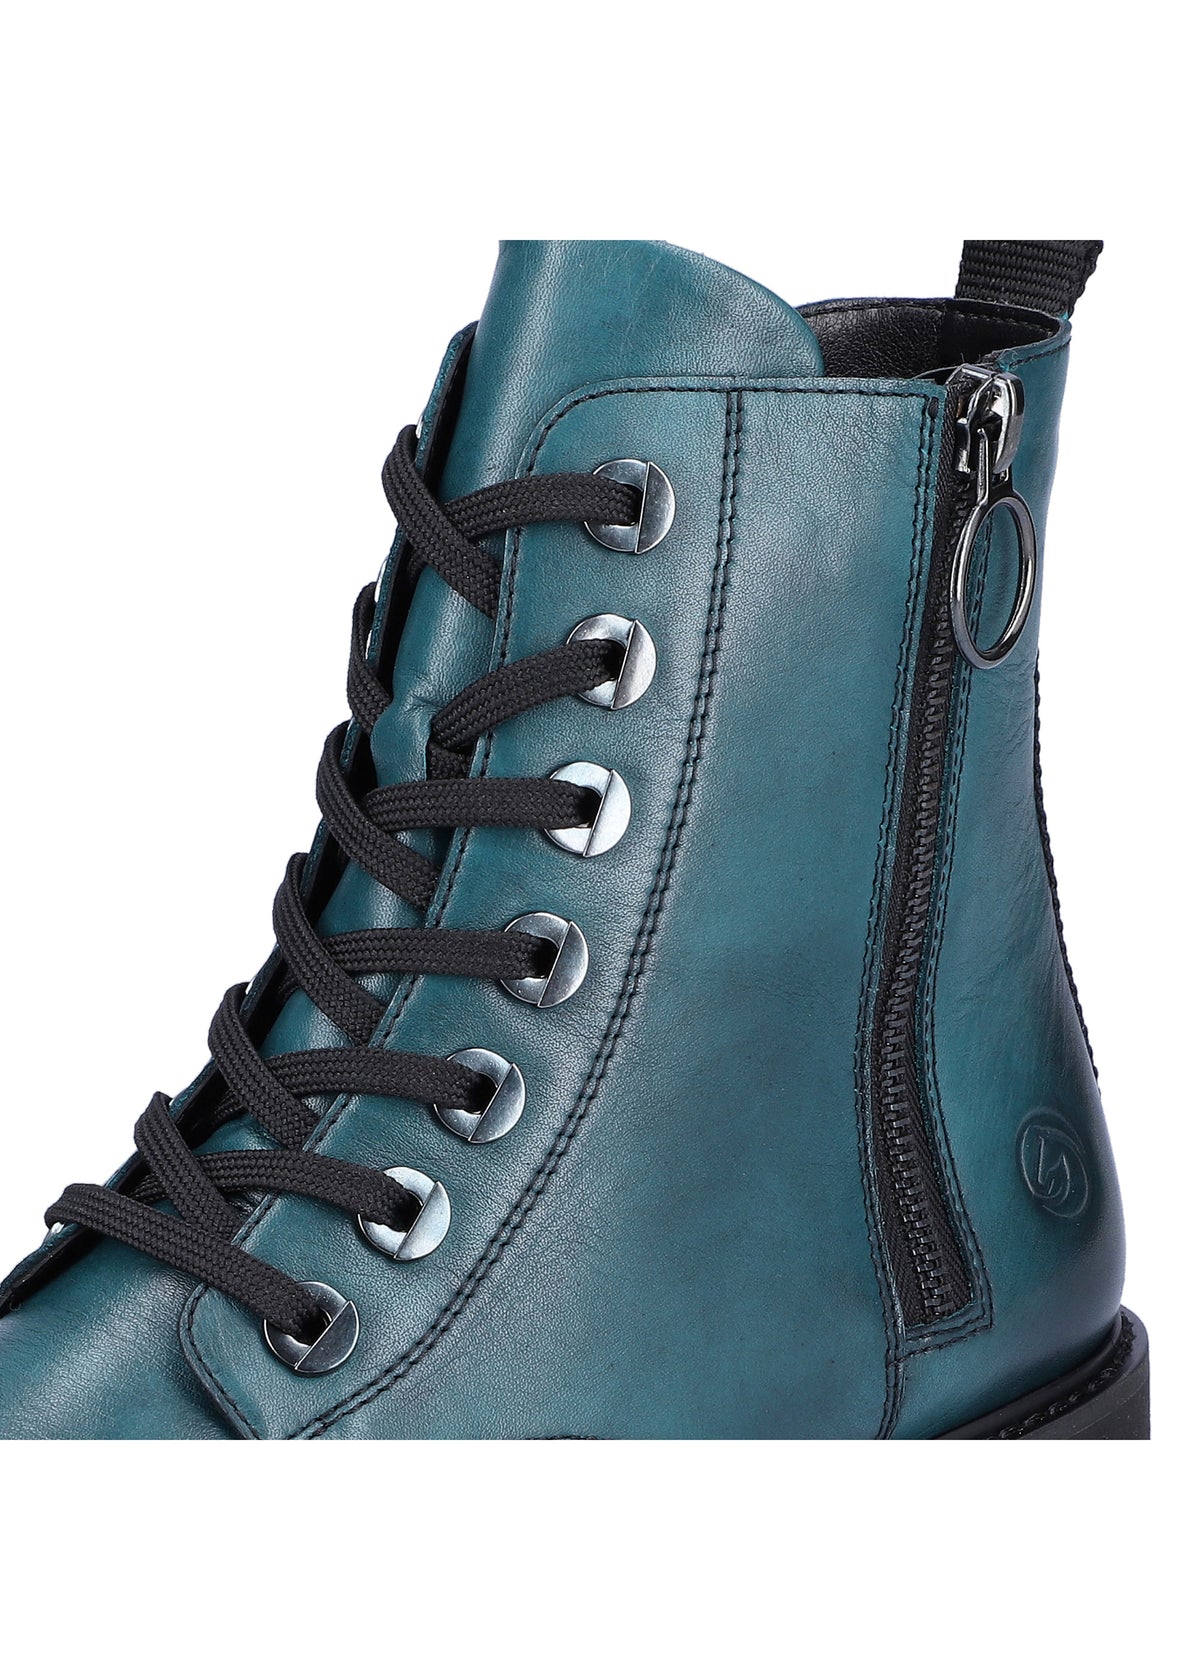 Maihari ankle boots - petrol blue